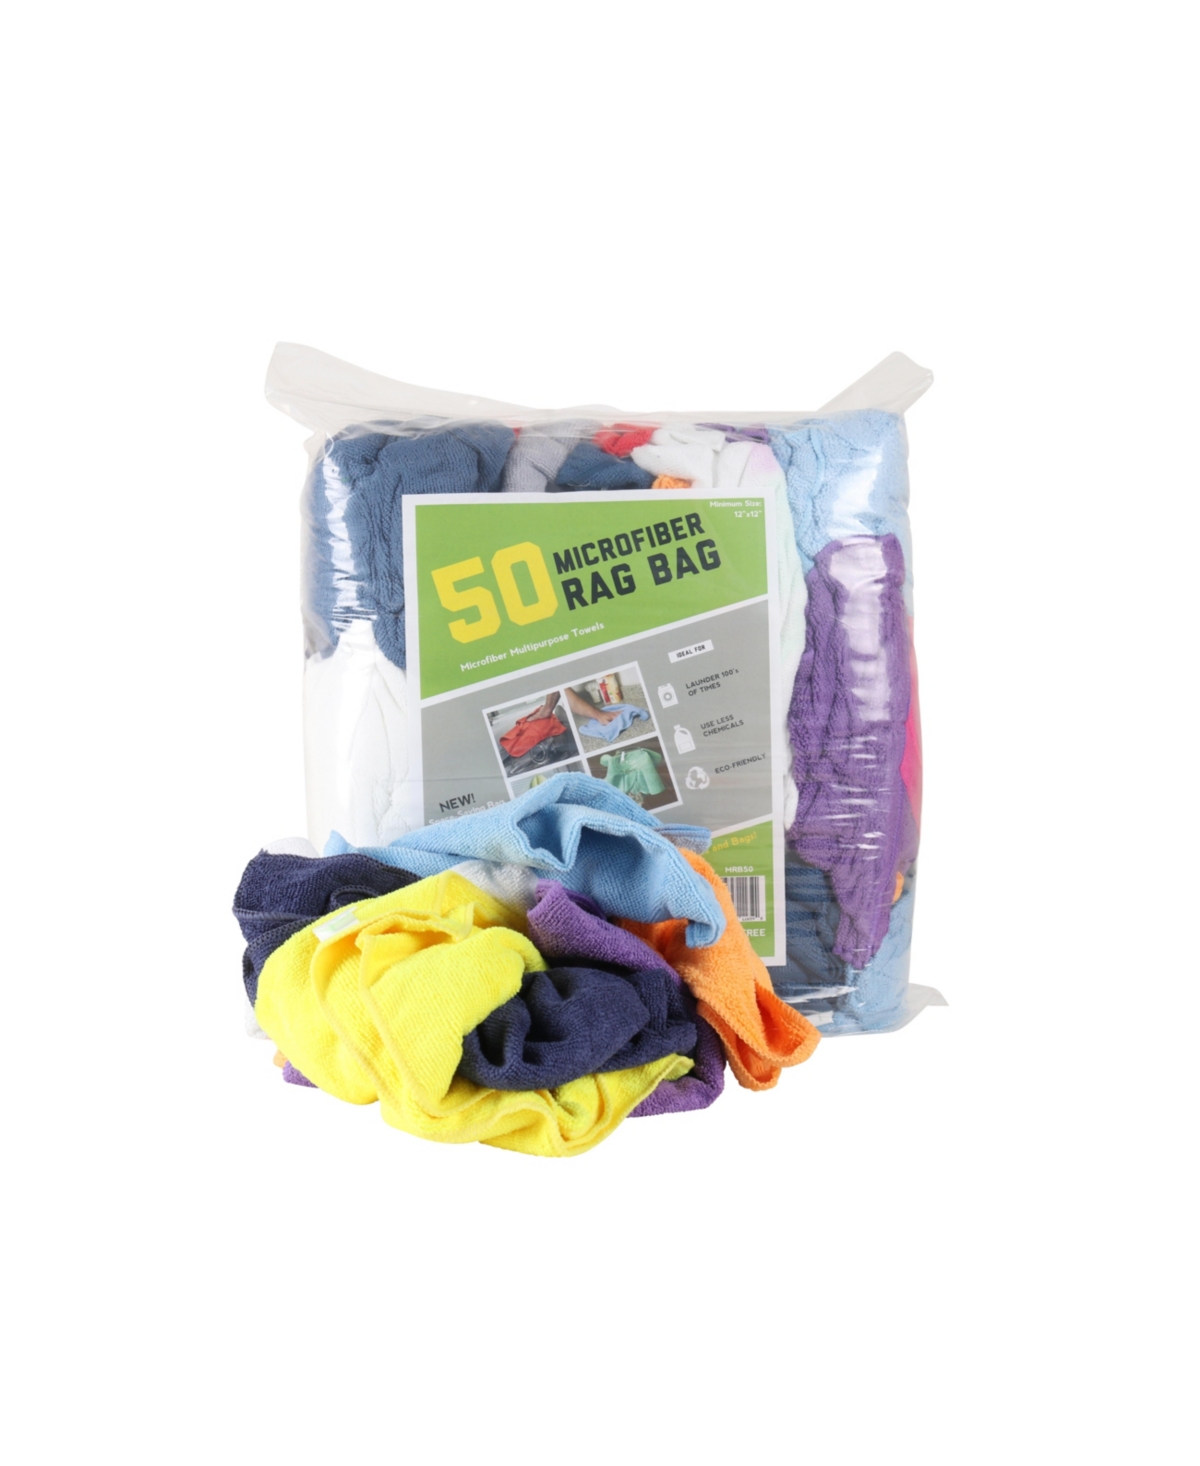 Microfiber Cleaning Rags (Bag of 50), Assorted Colors, 12x12, Multi-Purpose Cloths, Reusable - Assorted